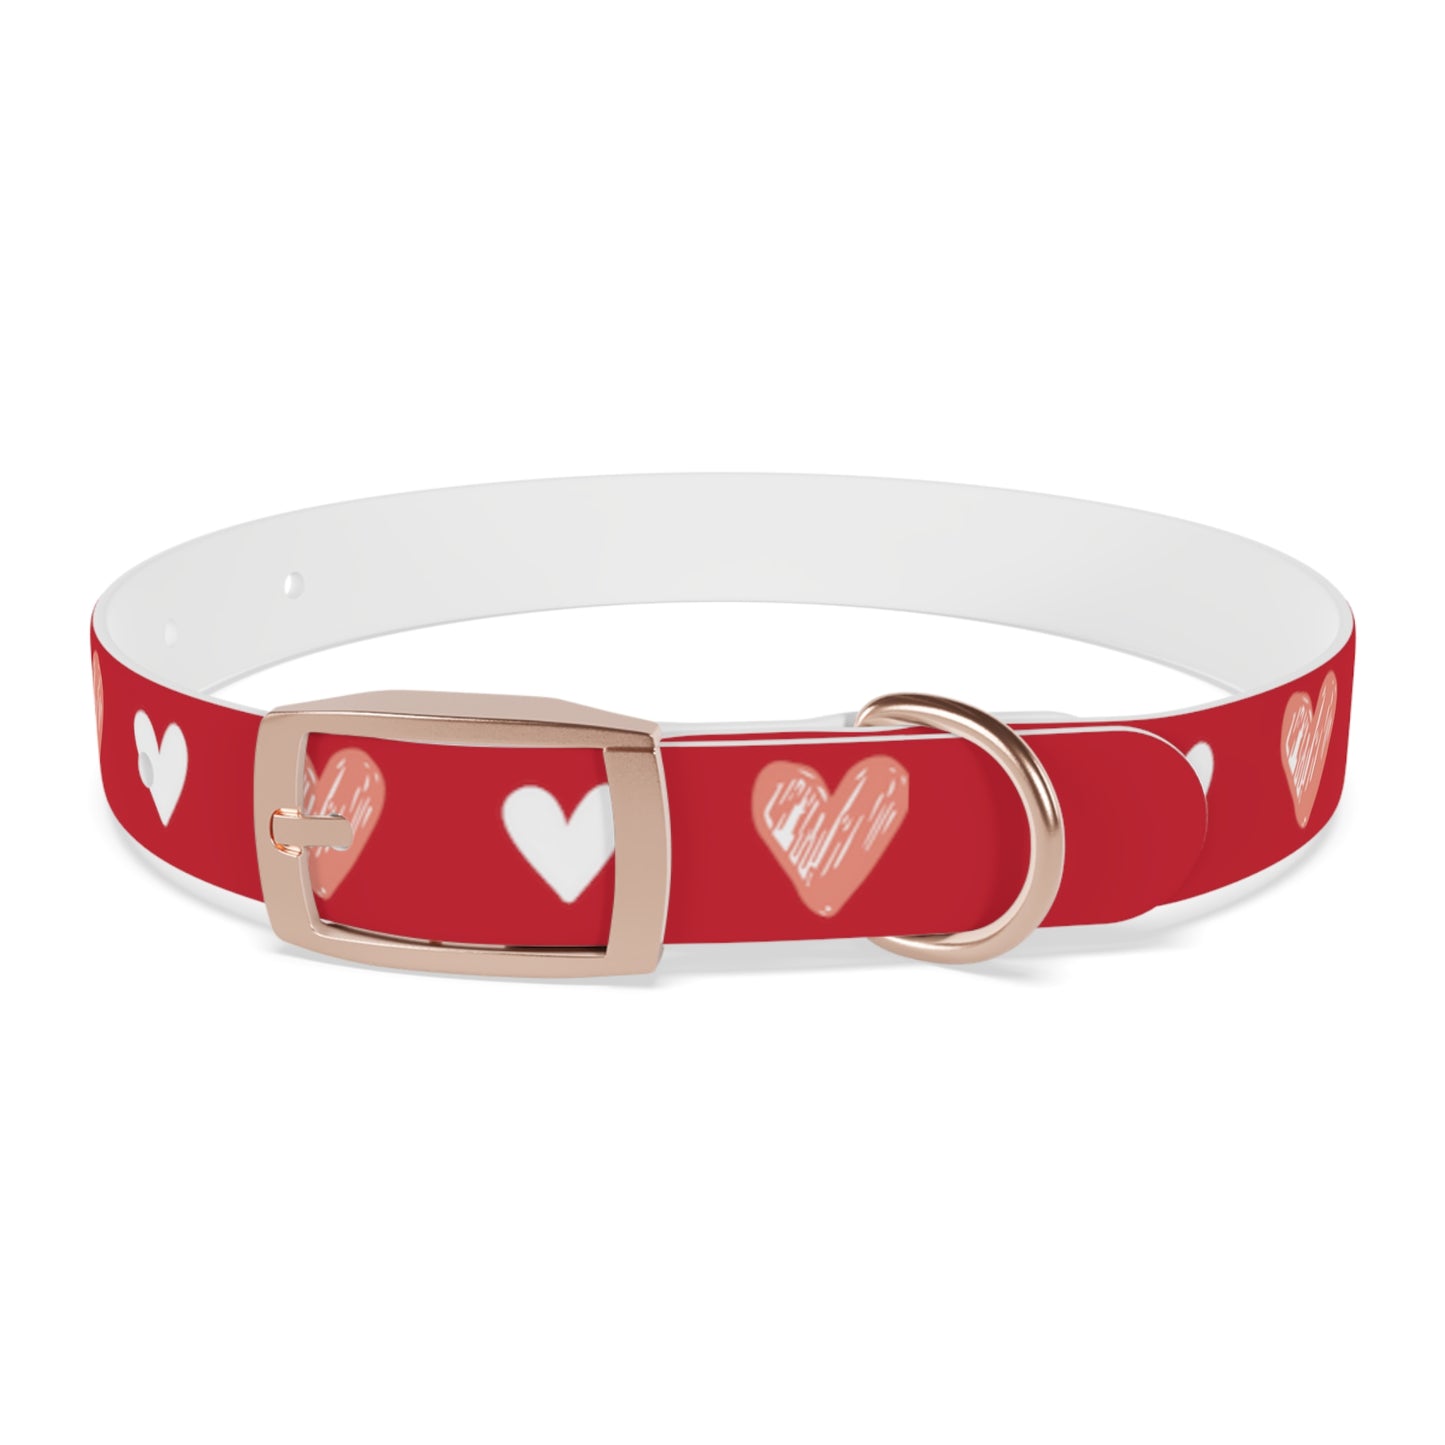 a dog collar with a beautiful hearts pattern design. The color of the dog collar is red